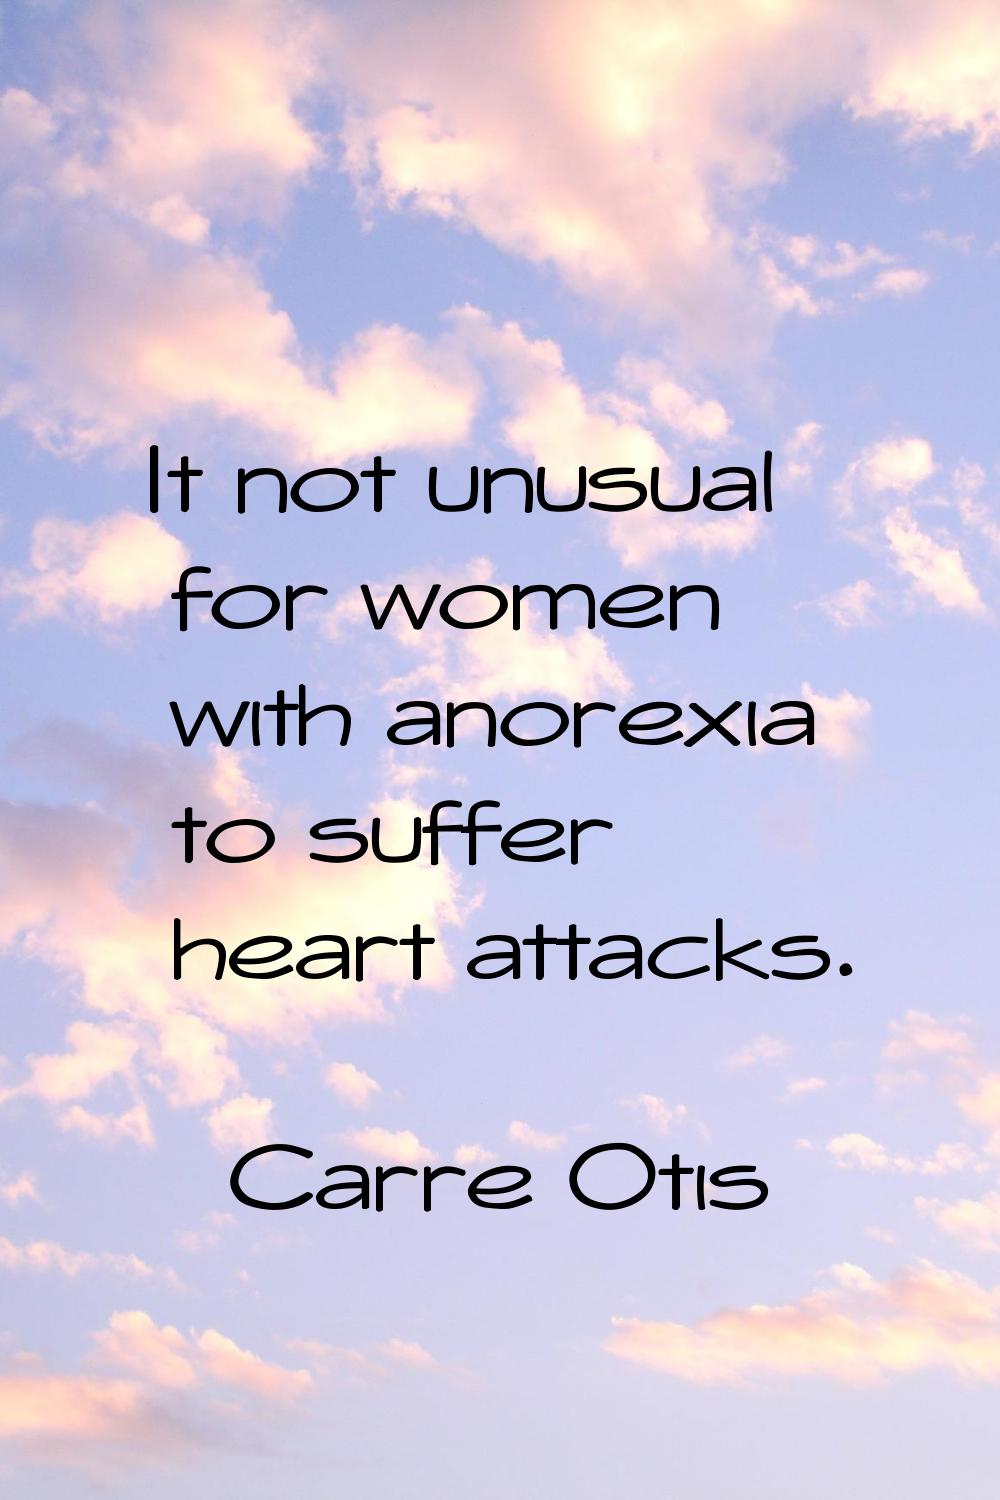 It not unusual for women with anorexia to suffer heart attacks.